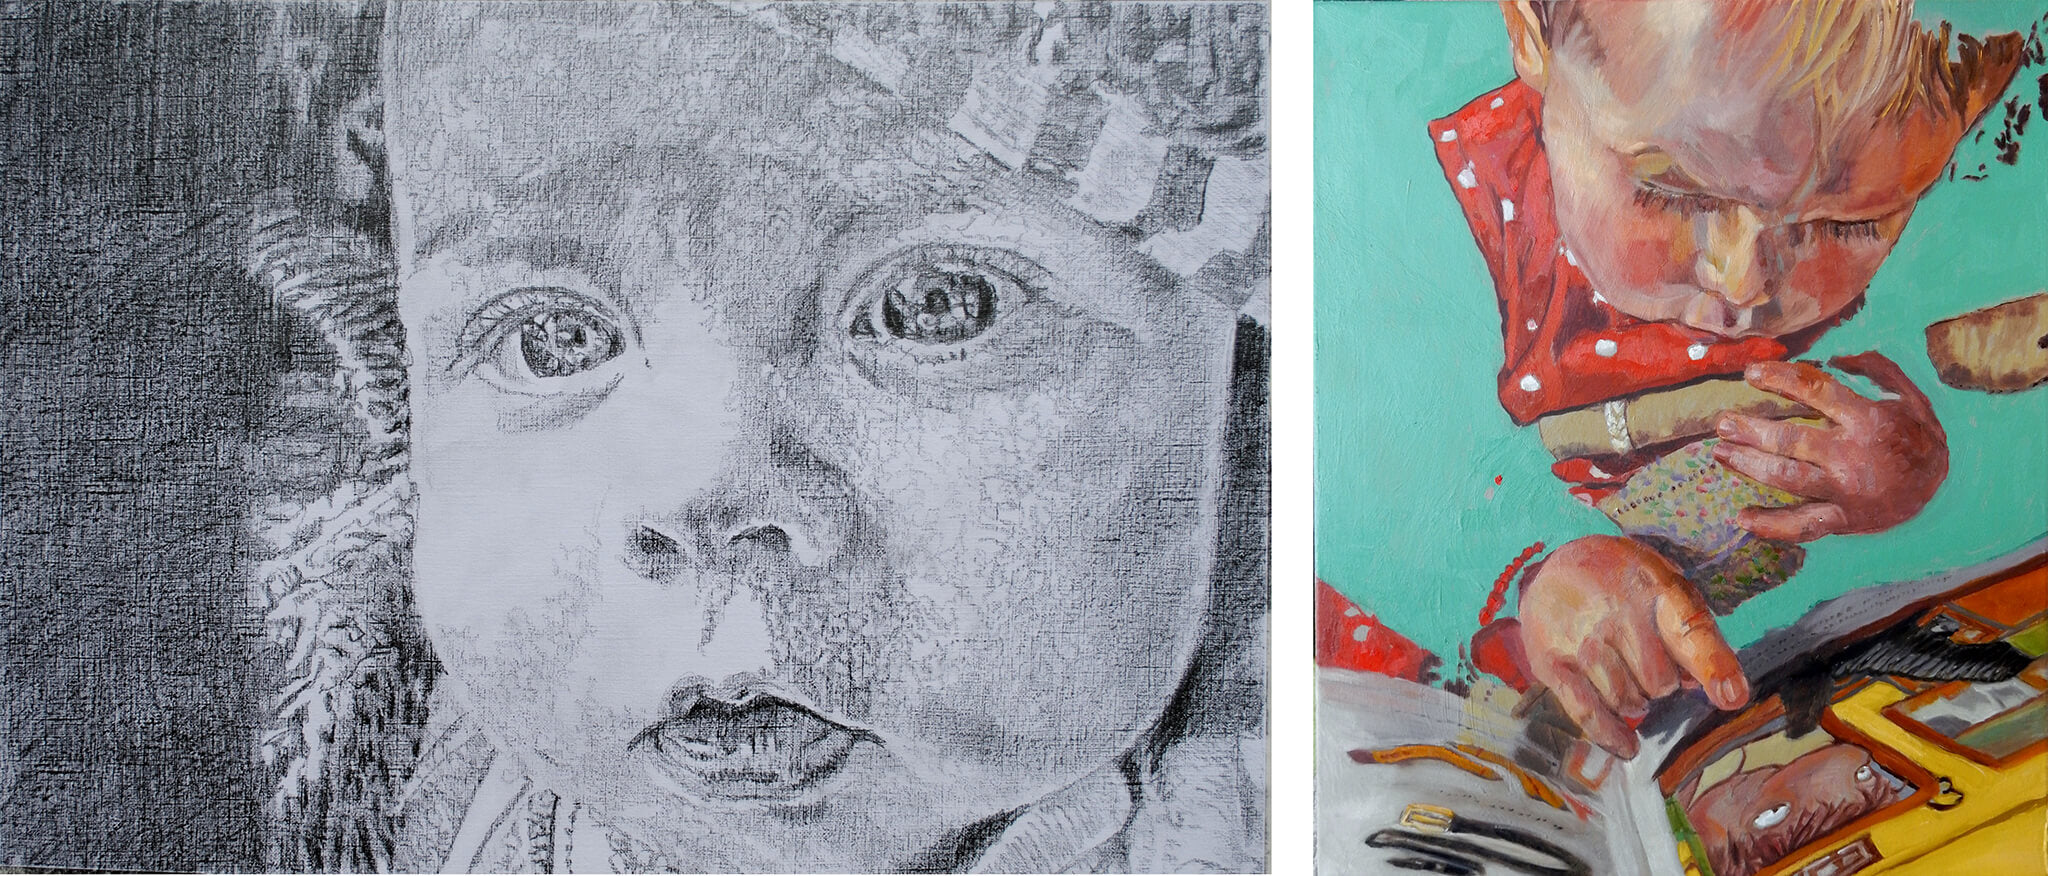 Daisy child portraits - pencil on paper and oil on canvas artworks - by Stella Tooth.